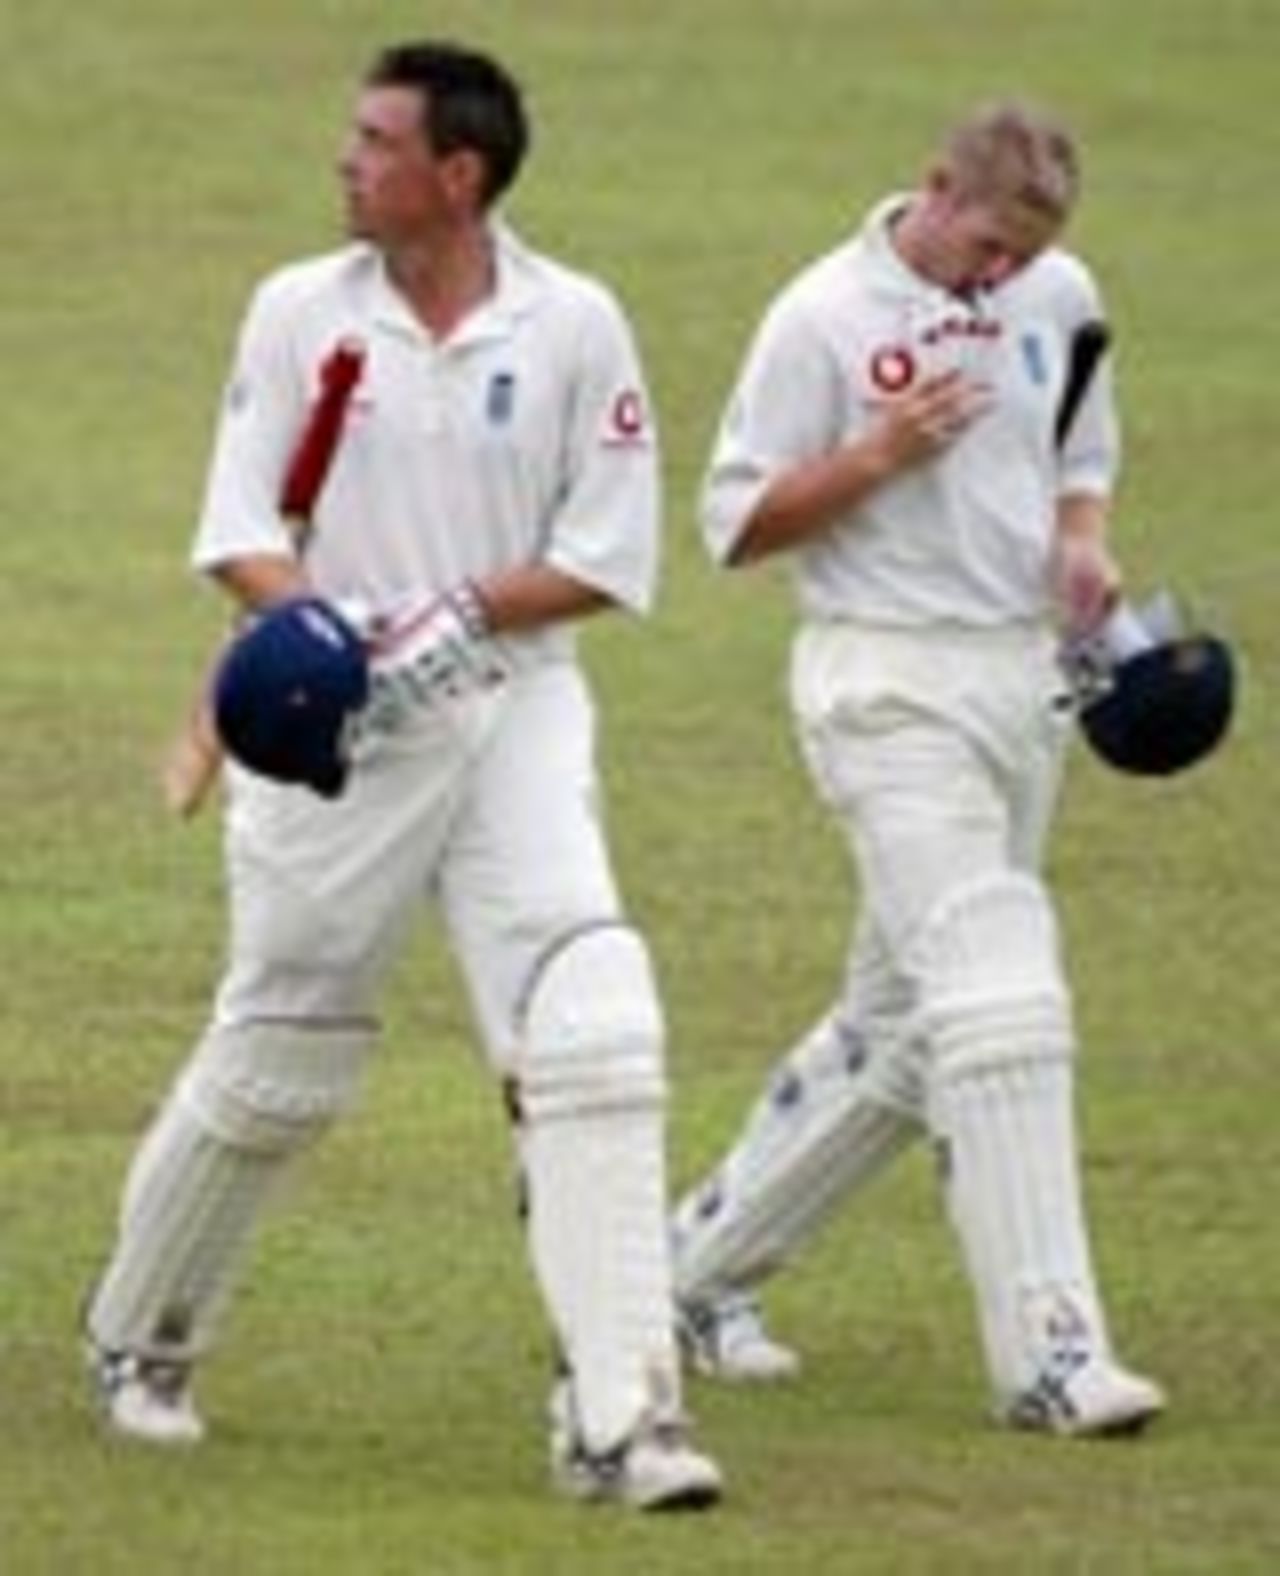 Job done! Giles and Hoggard leave the field with the draw after the Galle Test